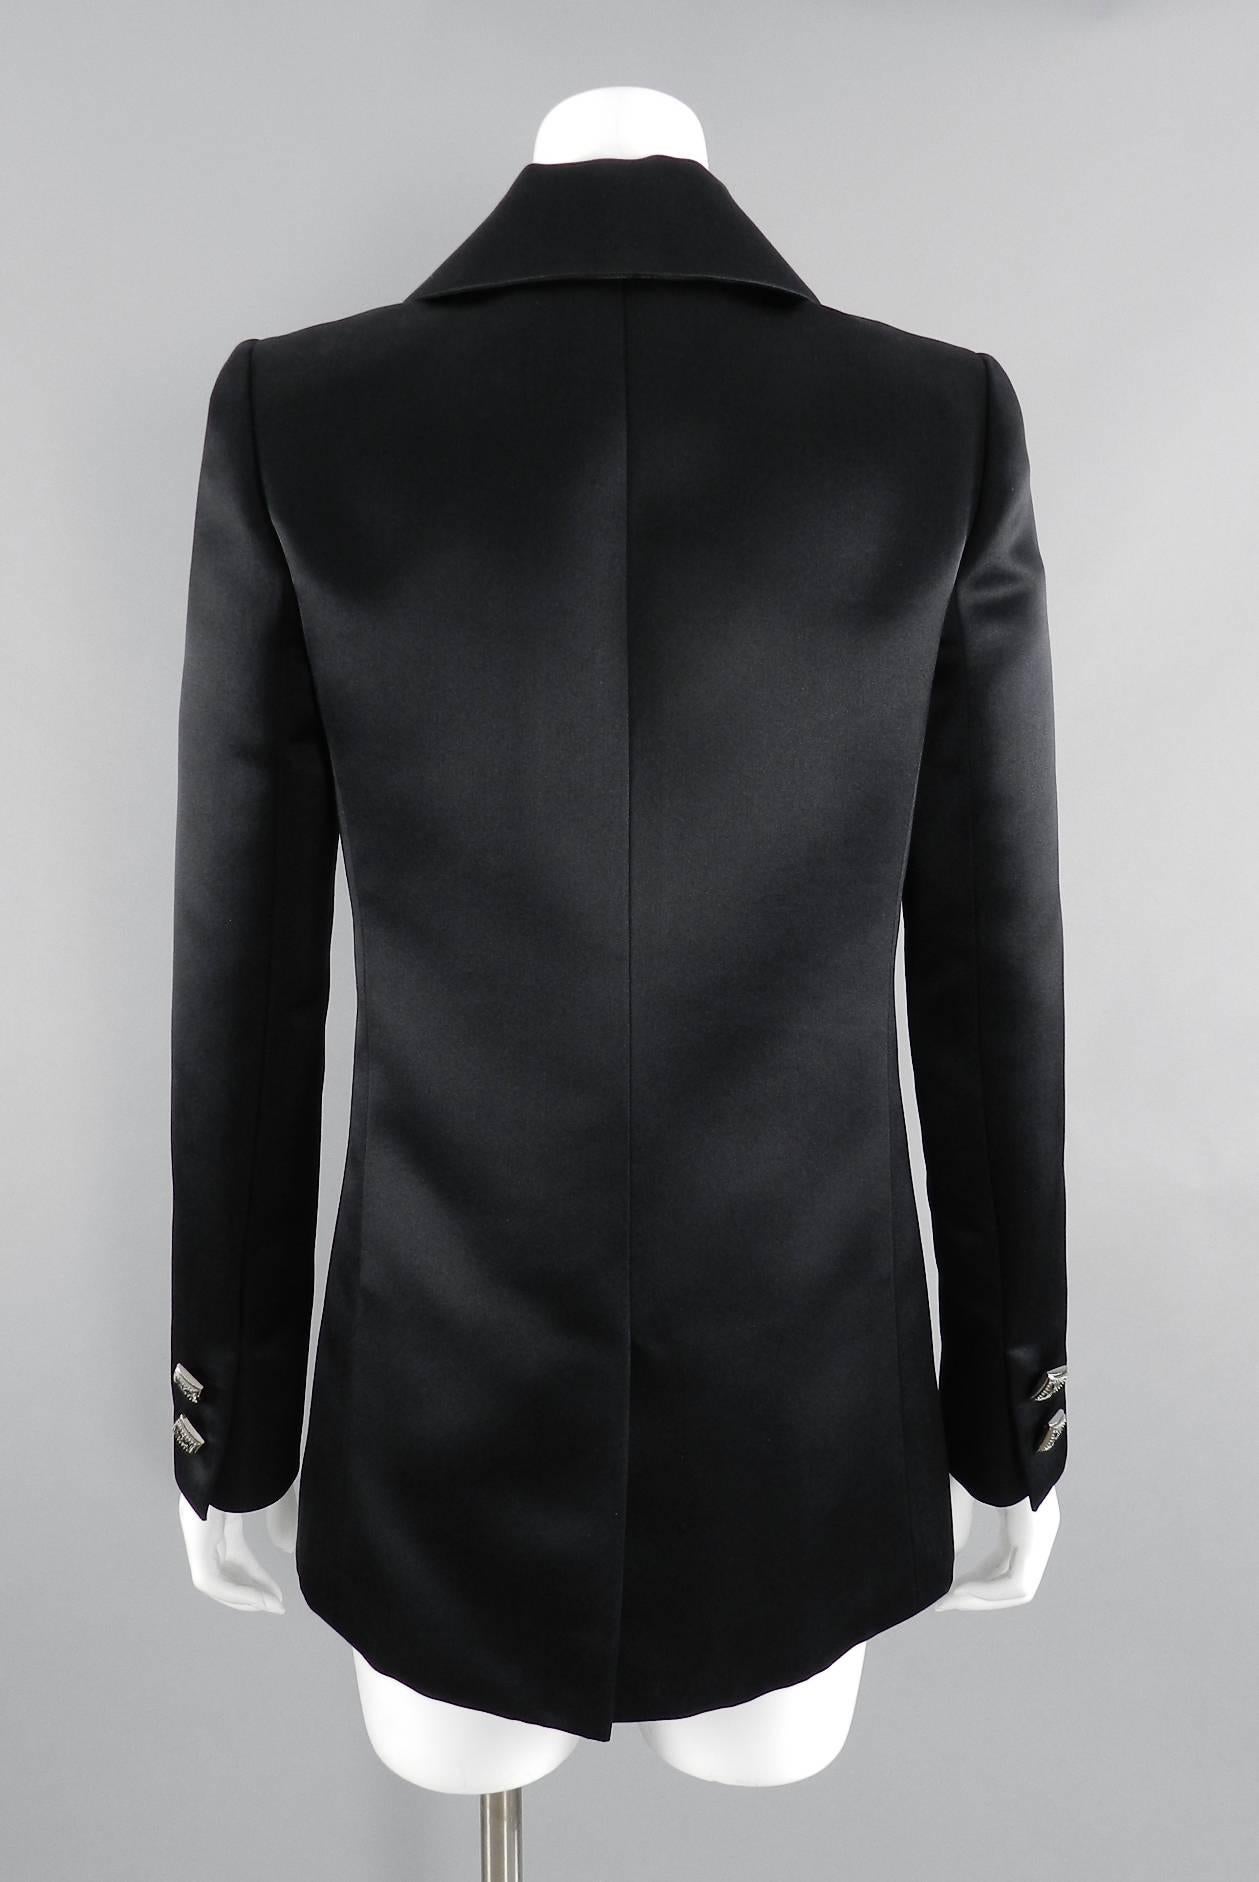 Women's Chanel 11A Black Silk Satin Caban Jacket with Square Silver Buttons For Sale